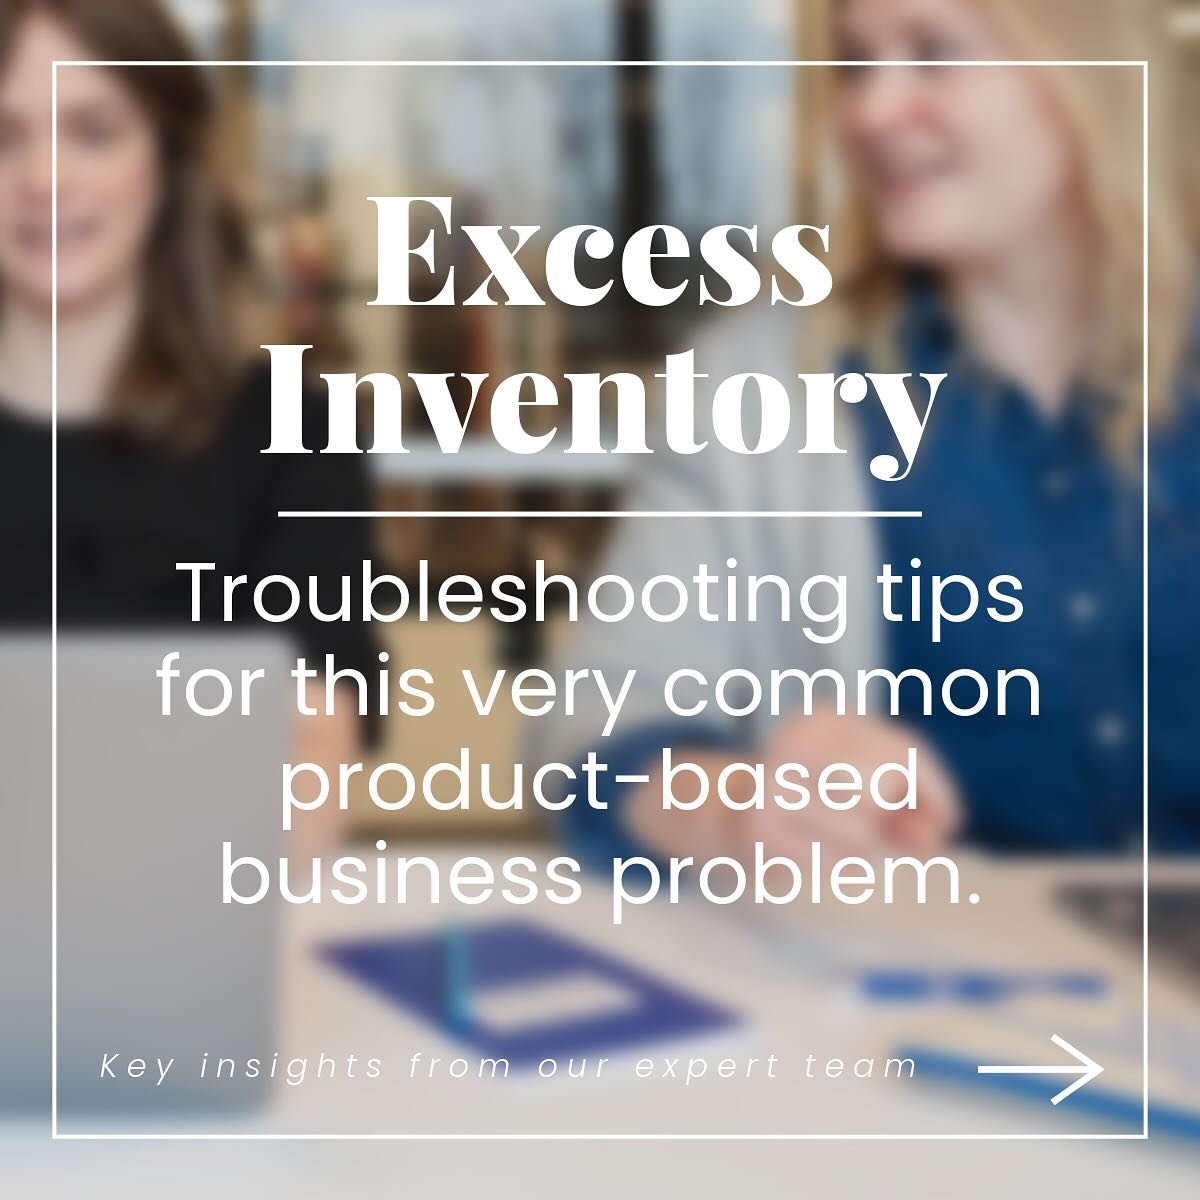 💾You&rsquo;ll want to save this for later.  Many retailers or product-based businesses face the issue of excess inventory at some point. We&rsquo;ve got a few tips for getting out of that tough spot right now, and avoiding it in the future. 🛟

🛍️A